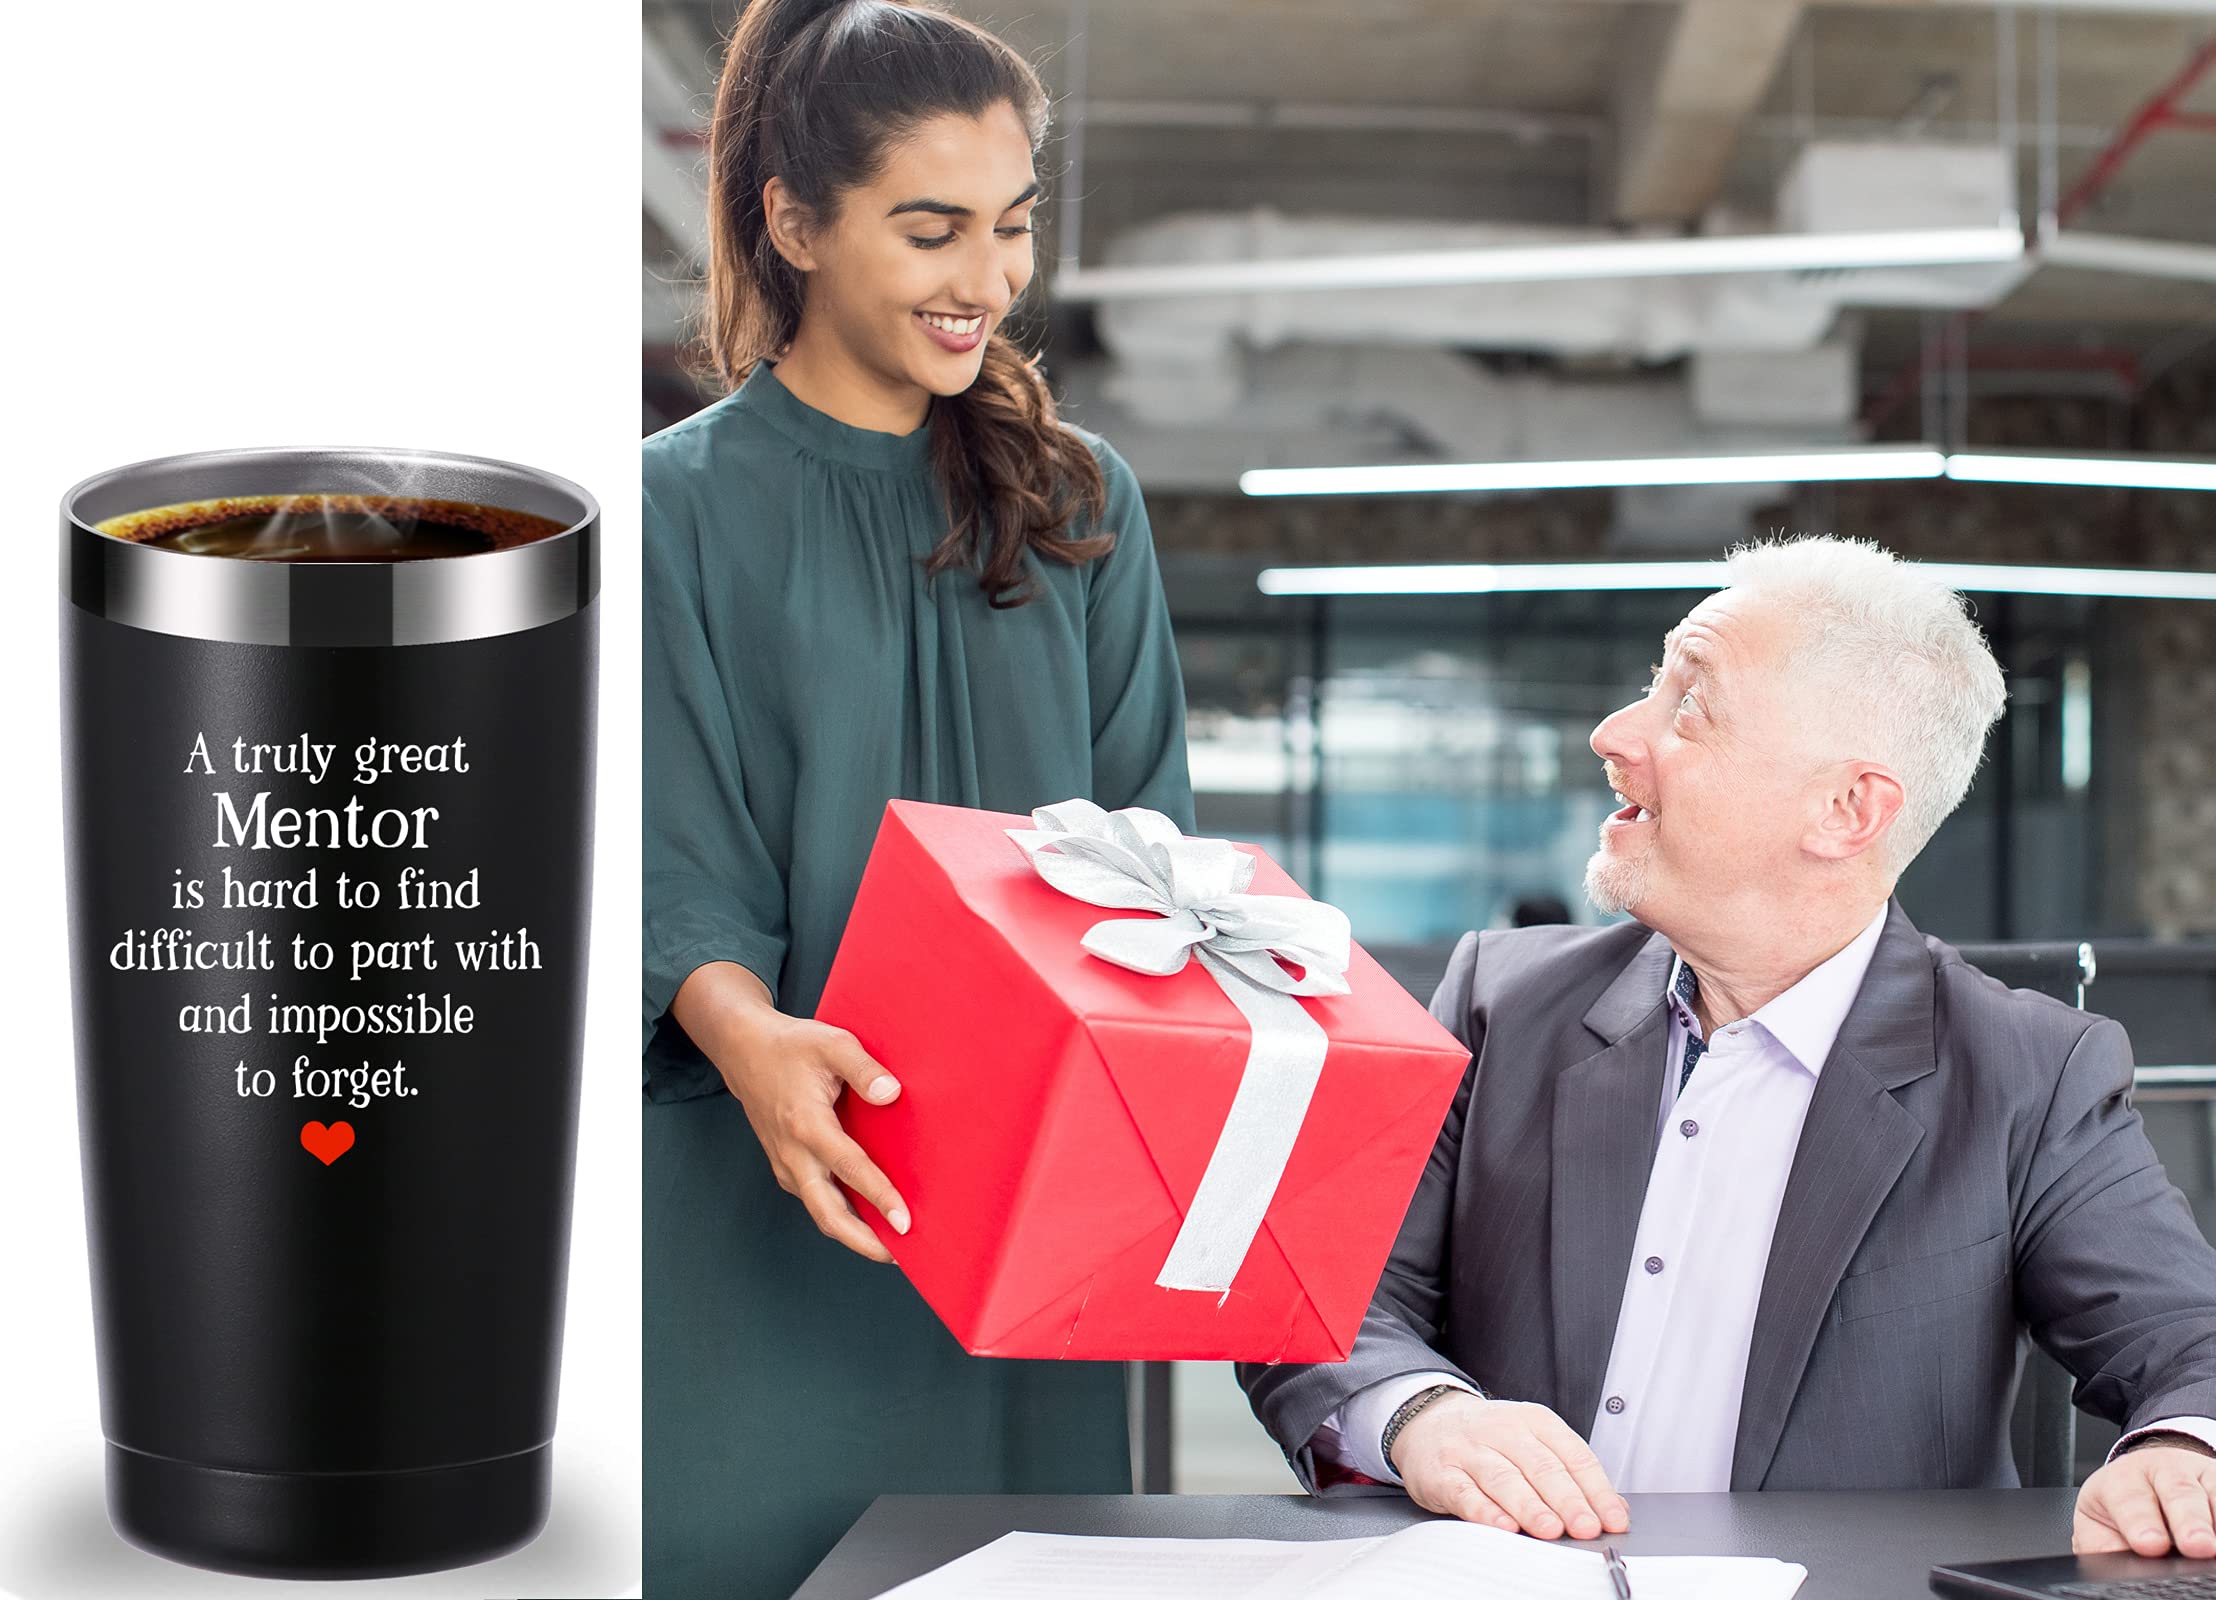 momocici Mentor Gifts 20 OZ Tumbler.A Truly Great Mentor Is Hard To Find And Impossible To Forget.Appreciation,Retirement,Goodbye,Farewell Gifts for Mentoring Teacher Boss Peer Mug(Black)